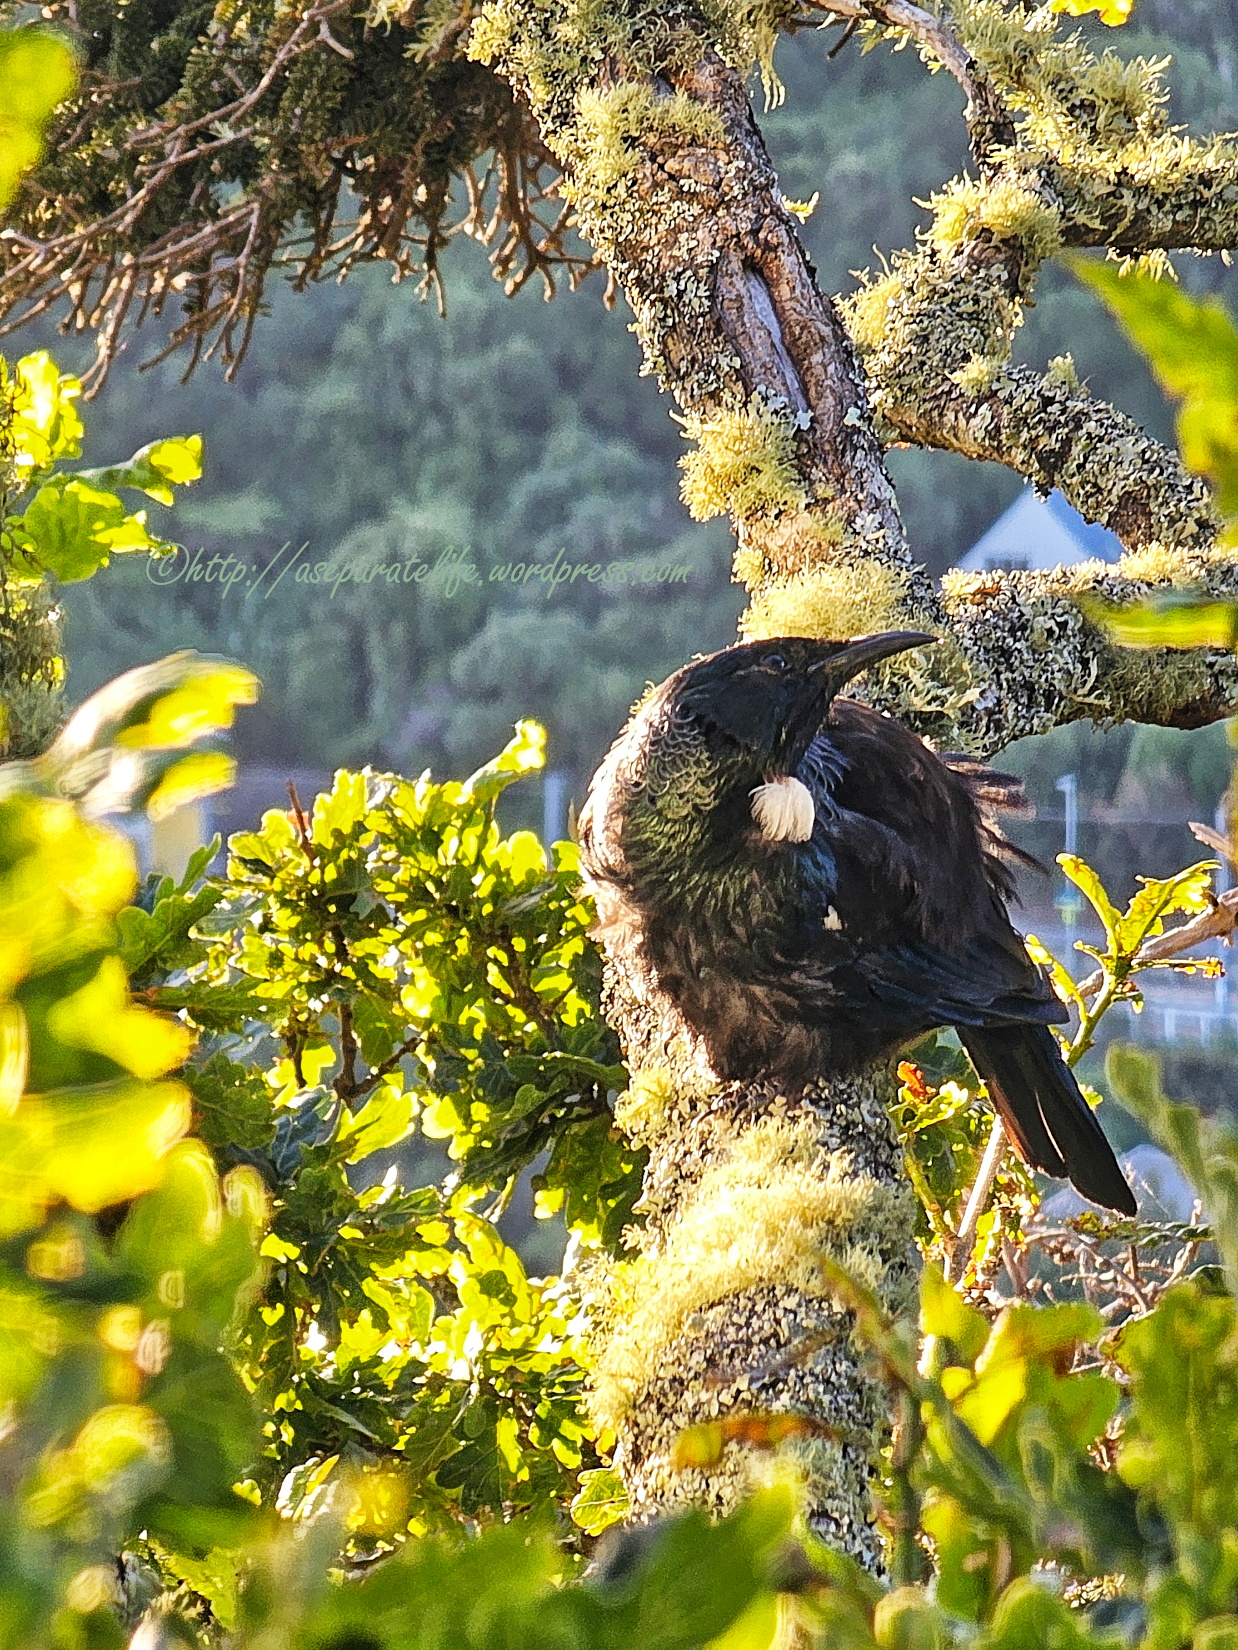 Tui sitting in a tree bathed in sunlight